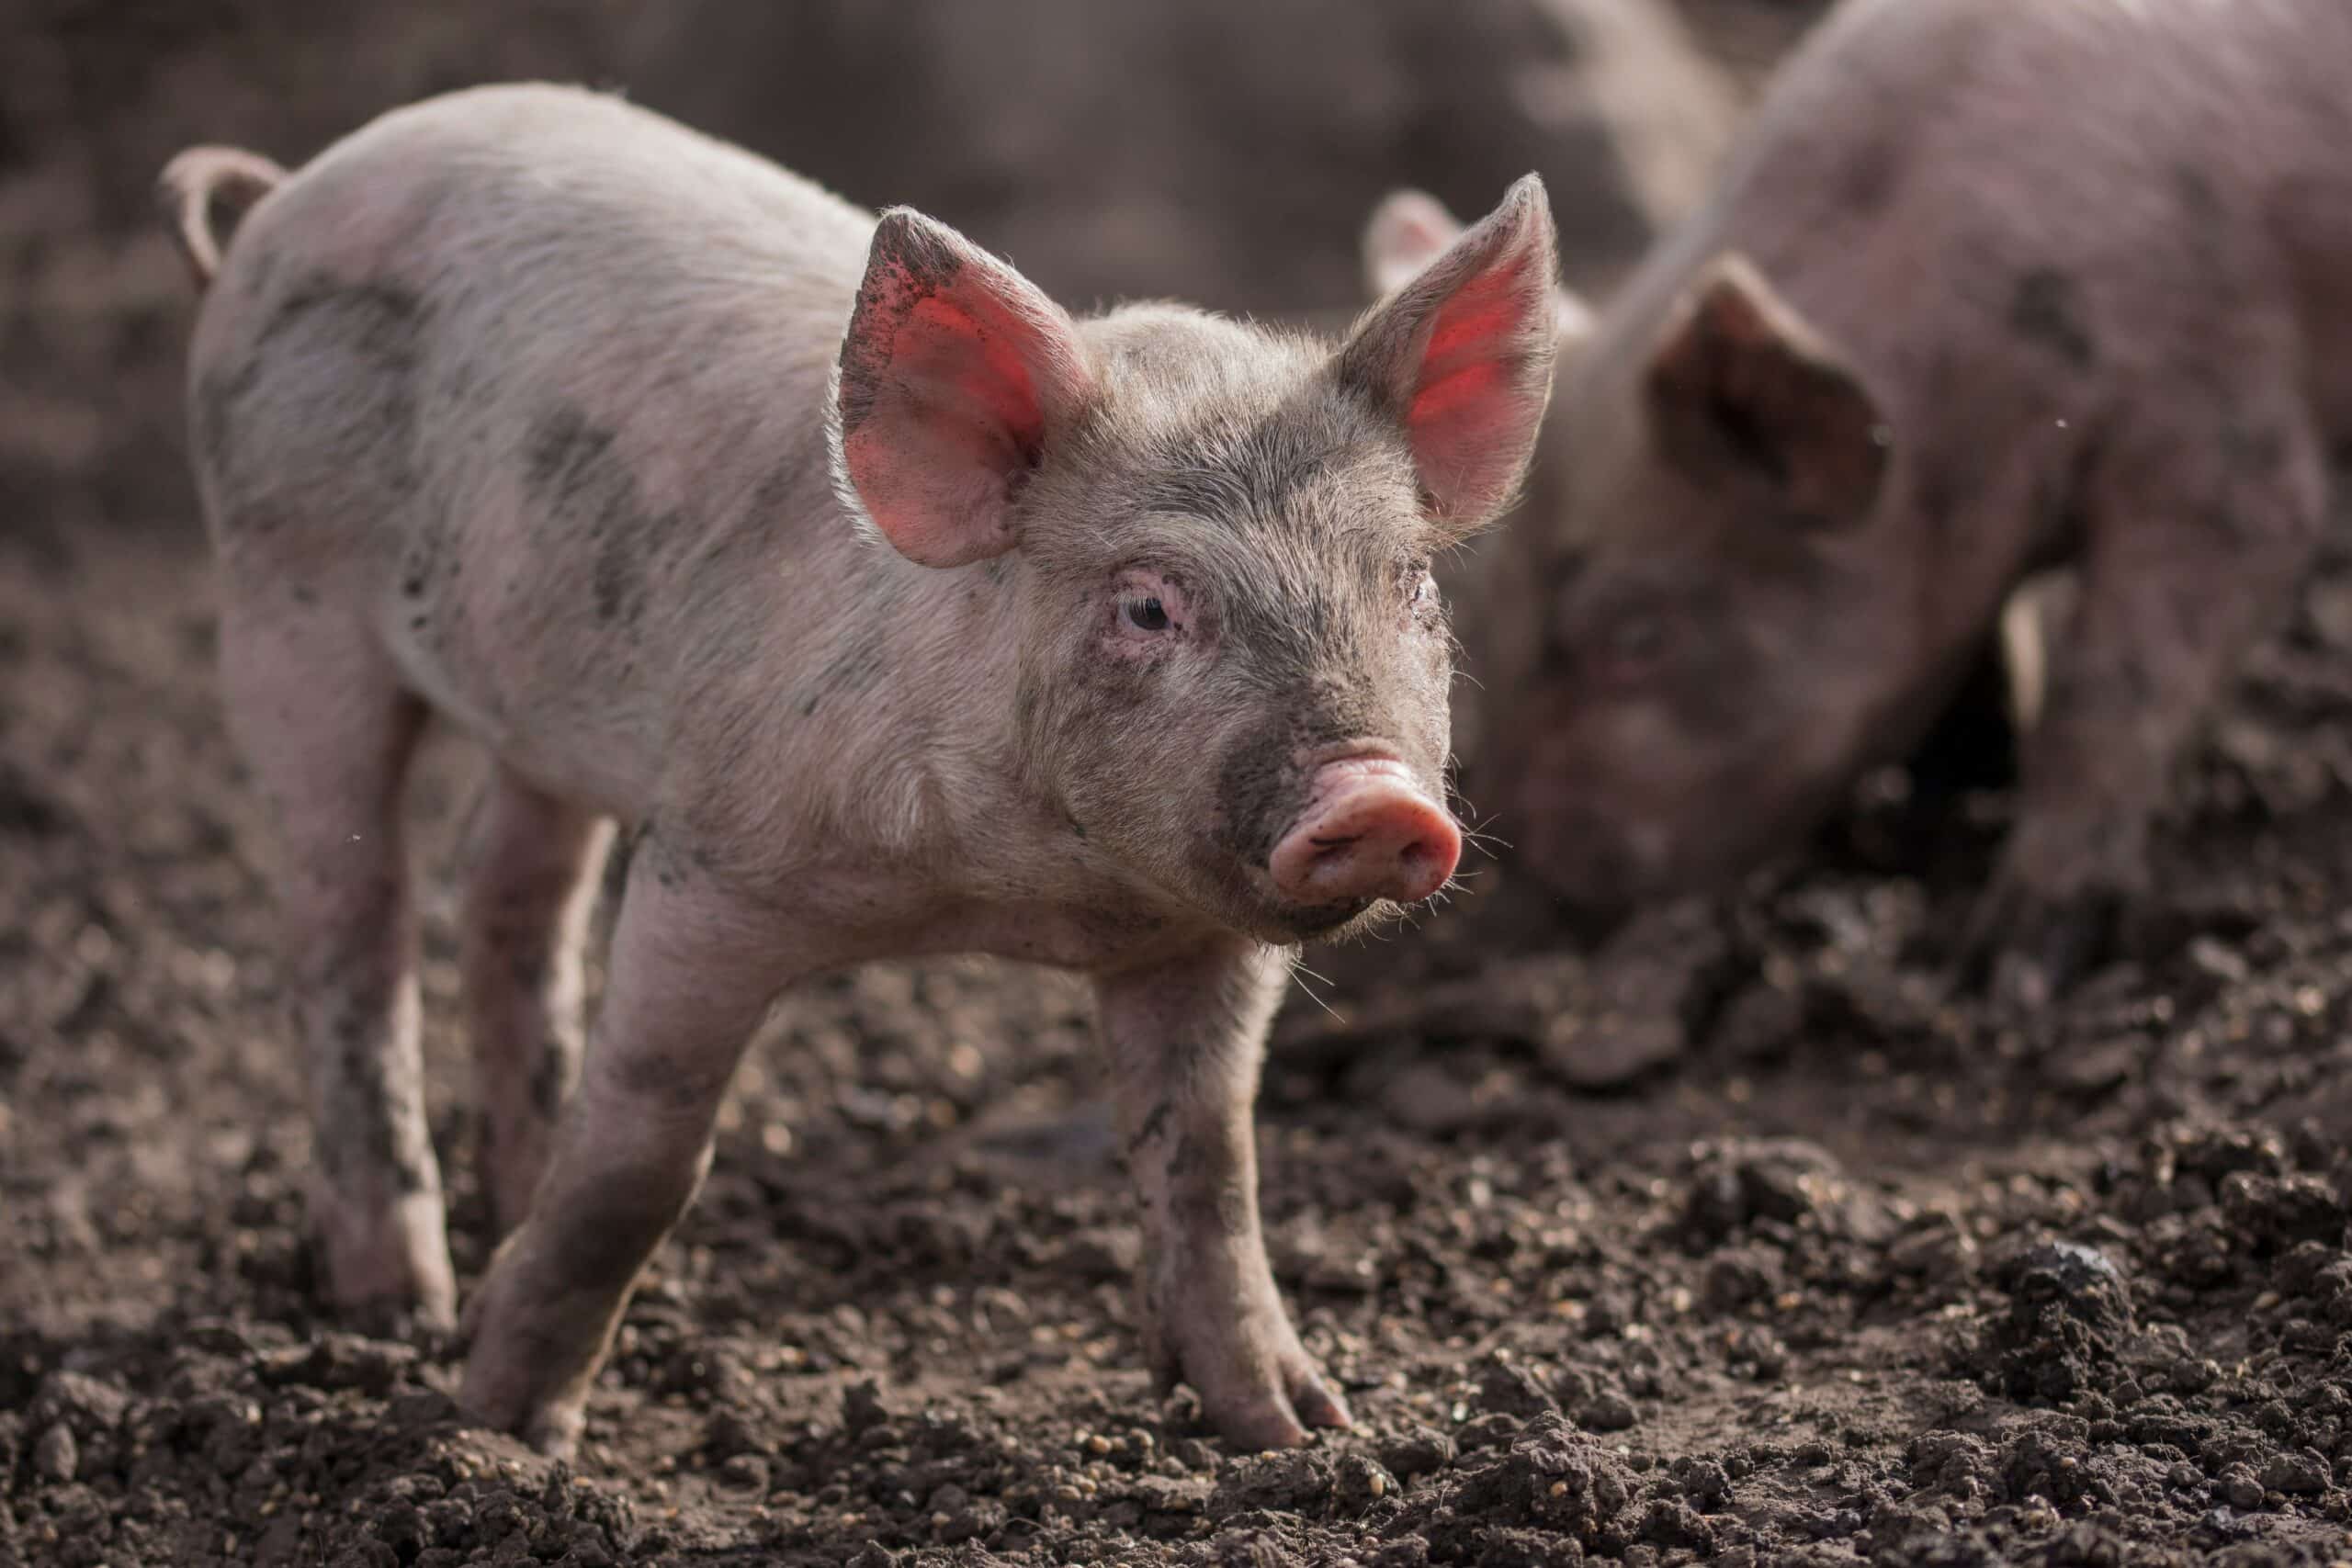 A young pig with a pinkish-gray complexion stands alert in a muddy field, awaiting livestock market updates, with another pig visible in the background.